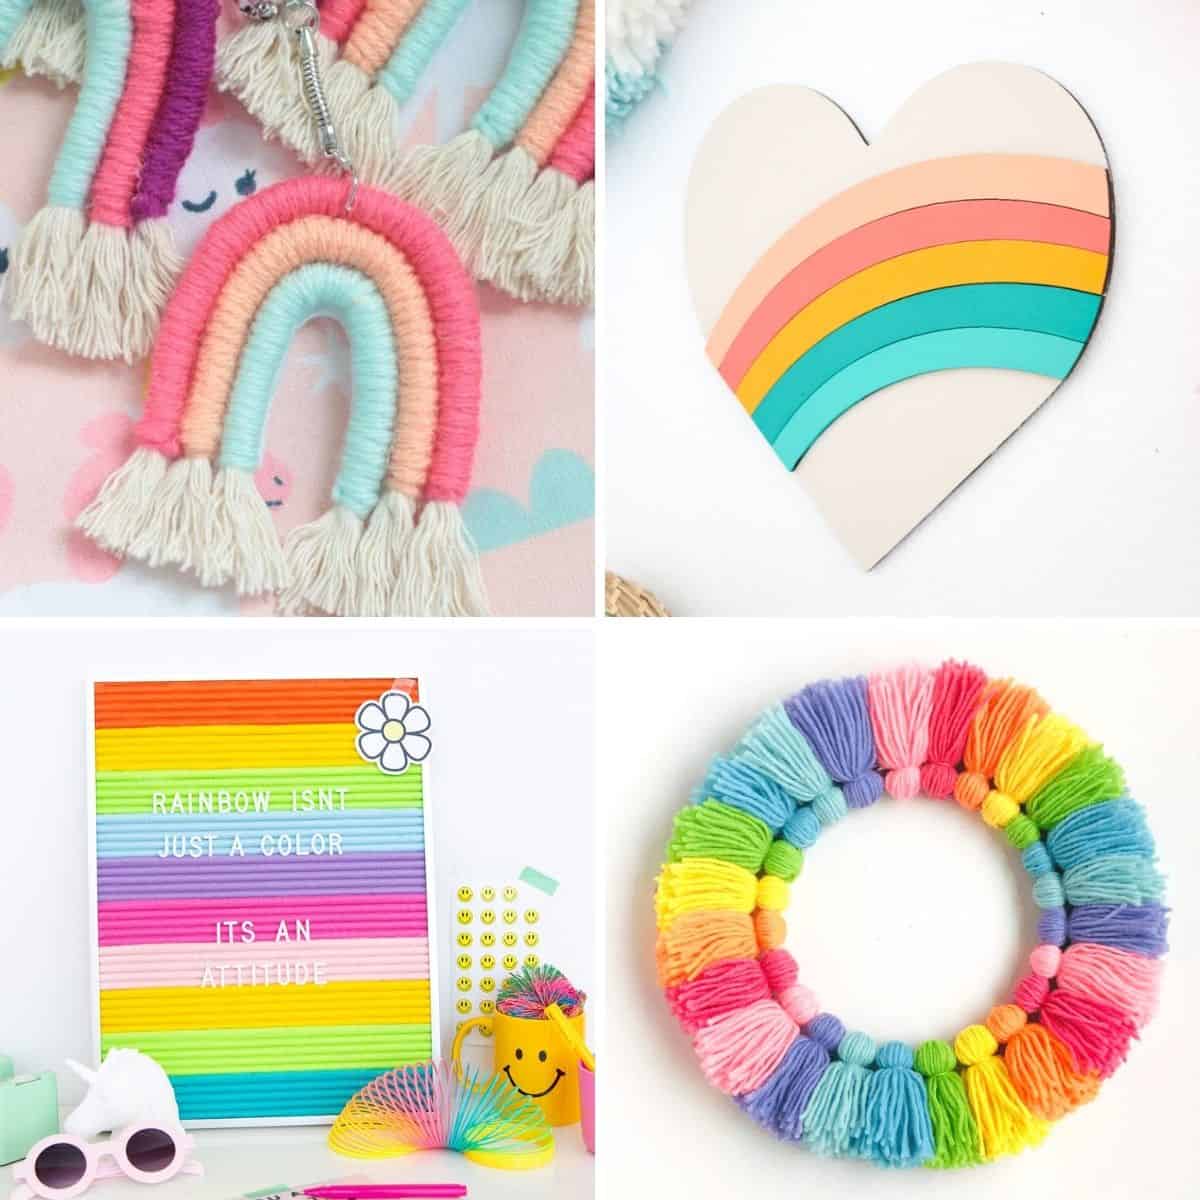 20 Affordable Rainbow Crafts for Adults - The Crafty Blog Stalker